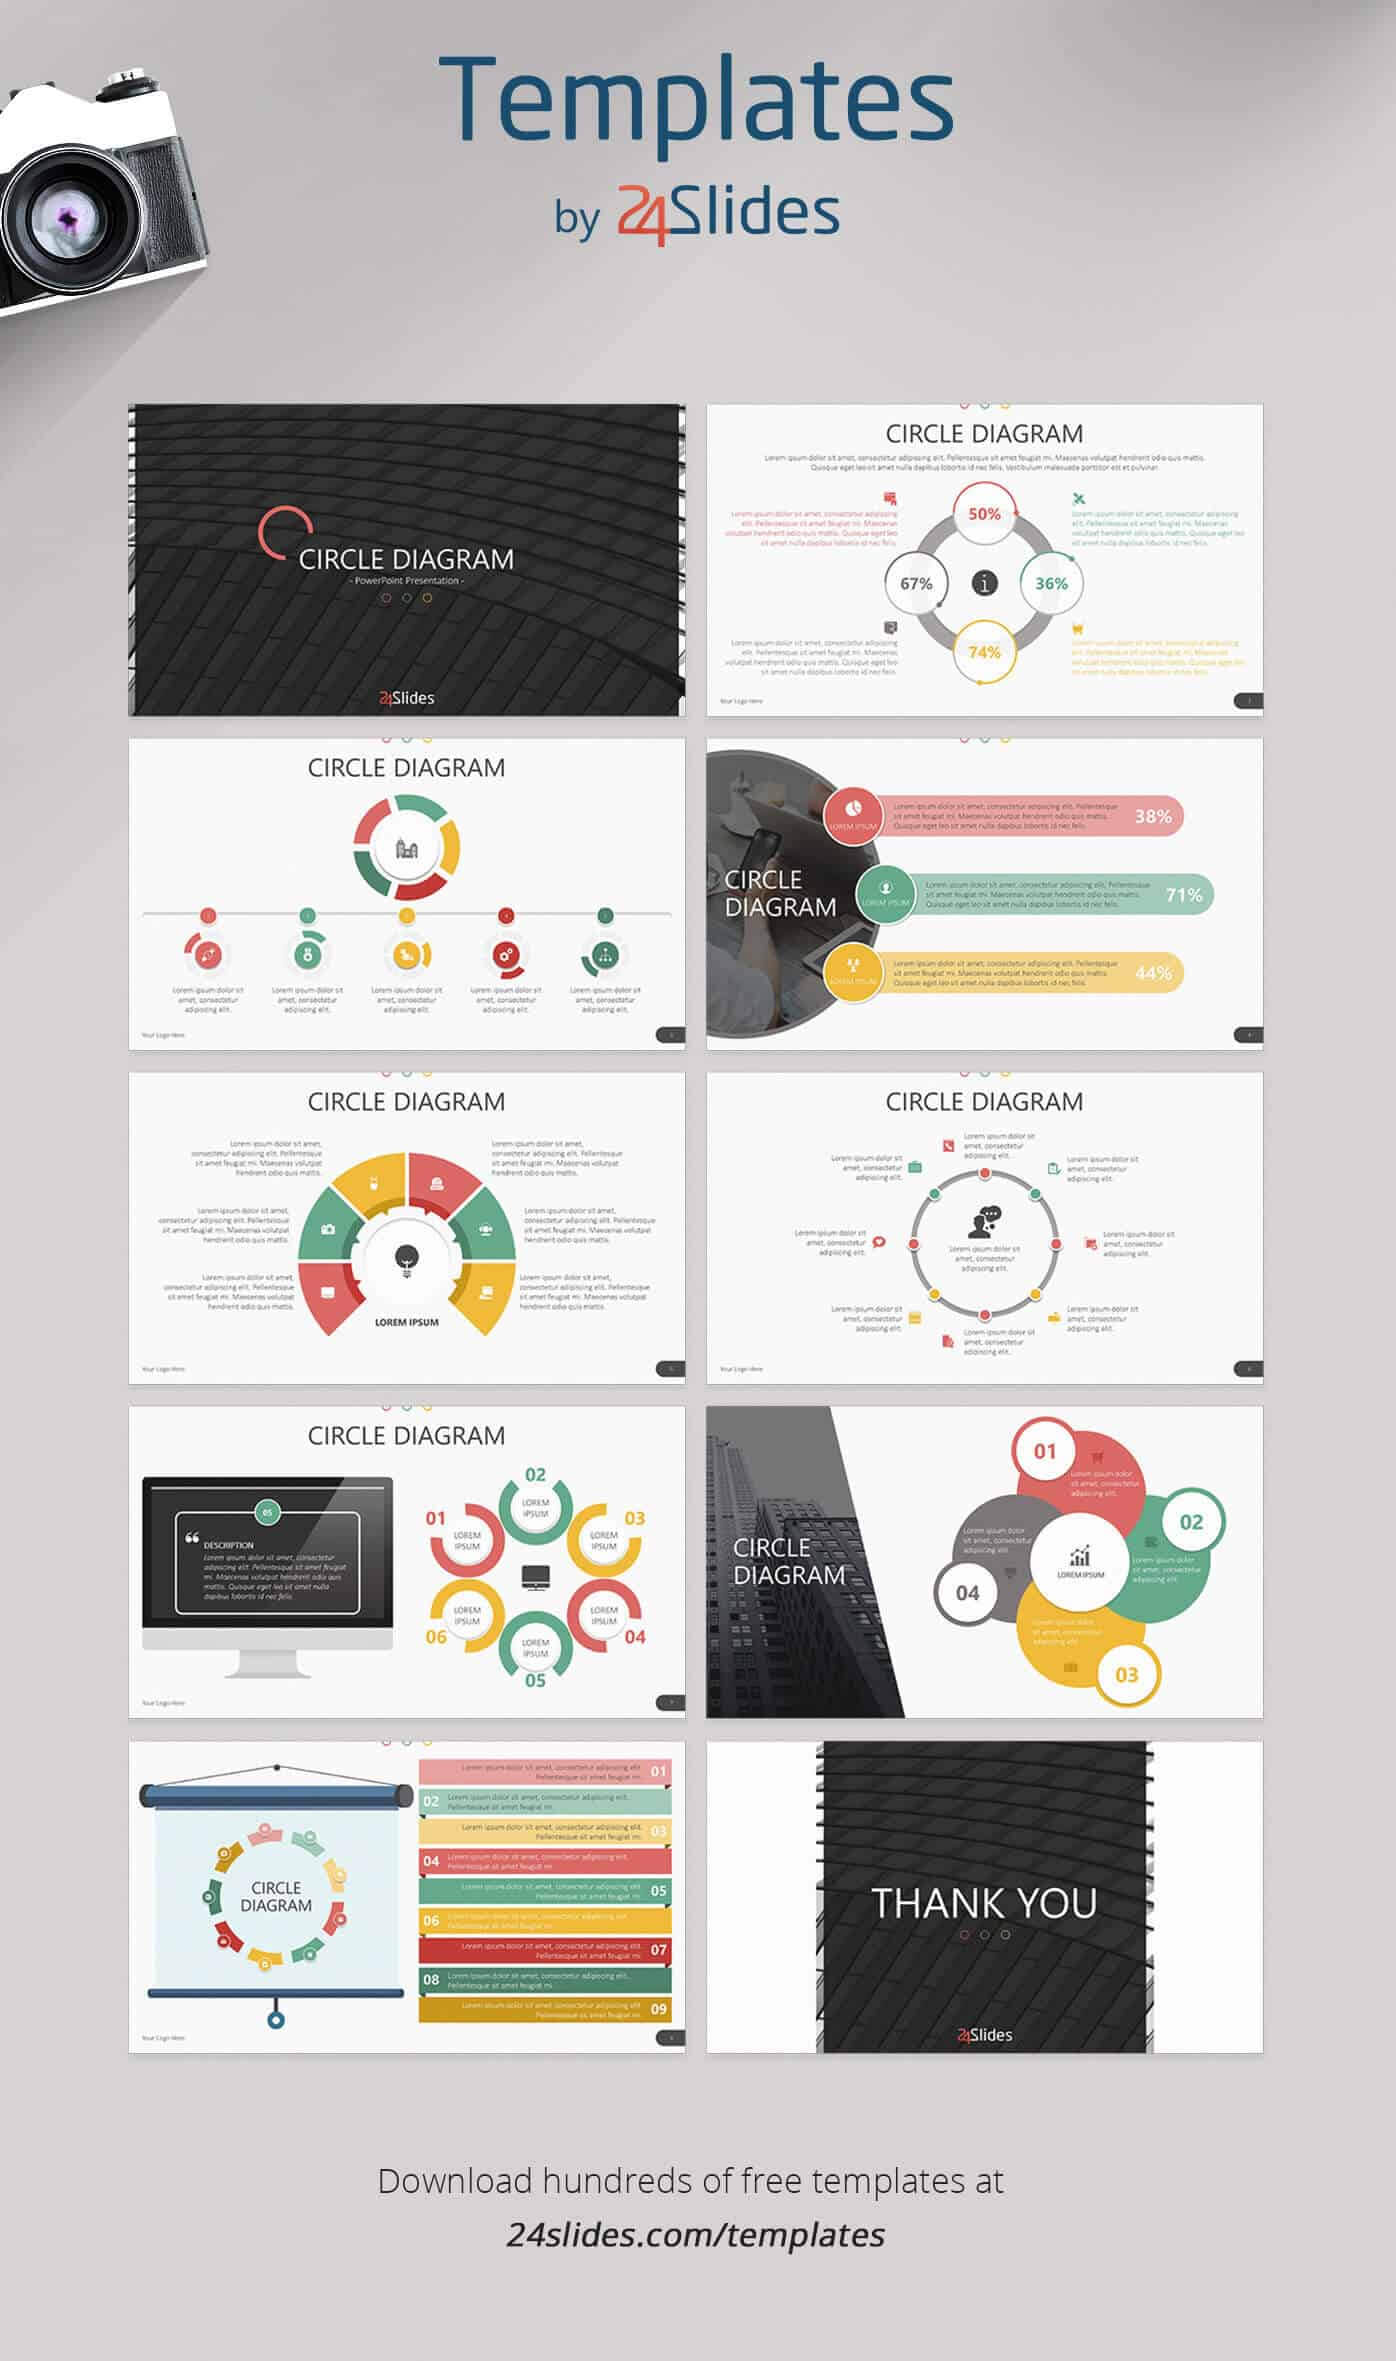 15 Fun And Colorful Free Powerpoint Templates | Present Better Within Free Powerpoint Presentation Templates Downloads